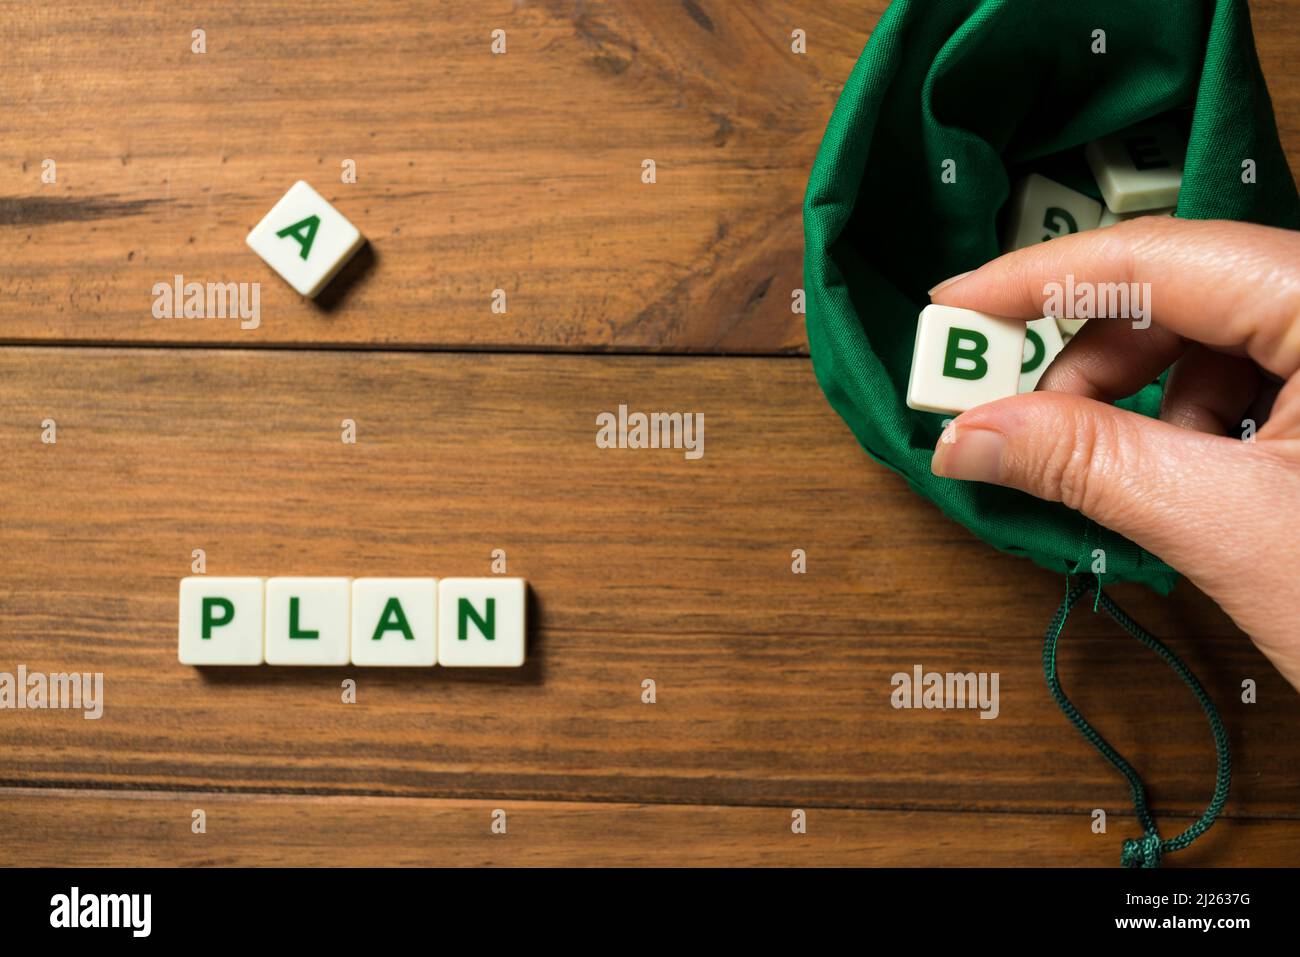 A hand taking out a piece with the letter B out of a green bag full of lettered pieces, to form the sentence PLAN B. Concept of planning for the futur Stock Photo